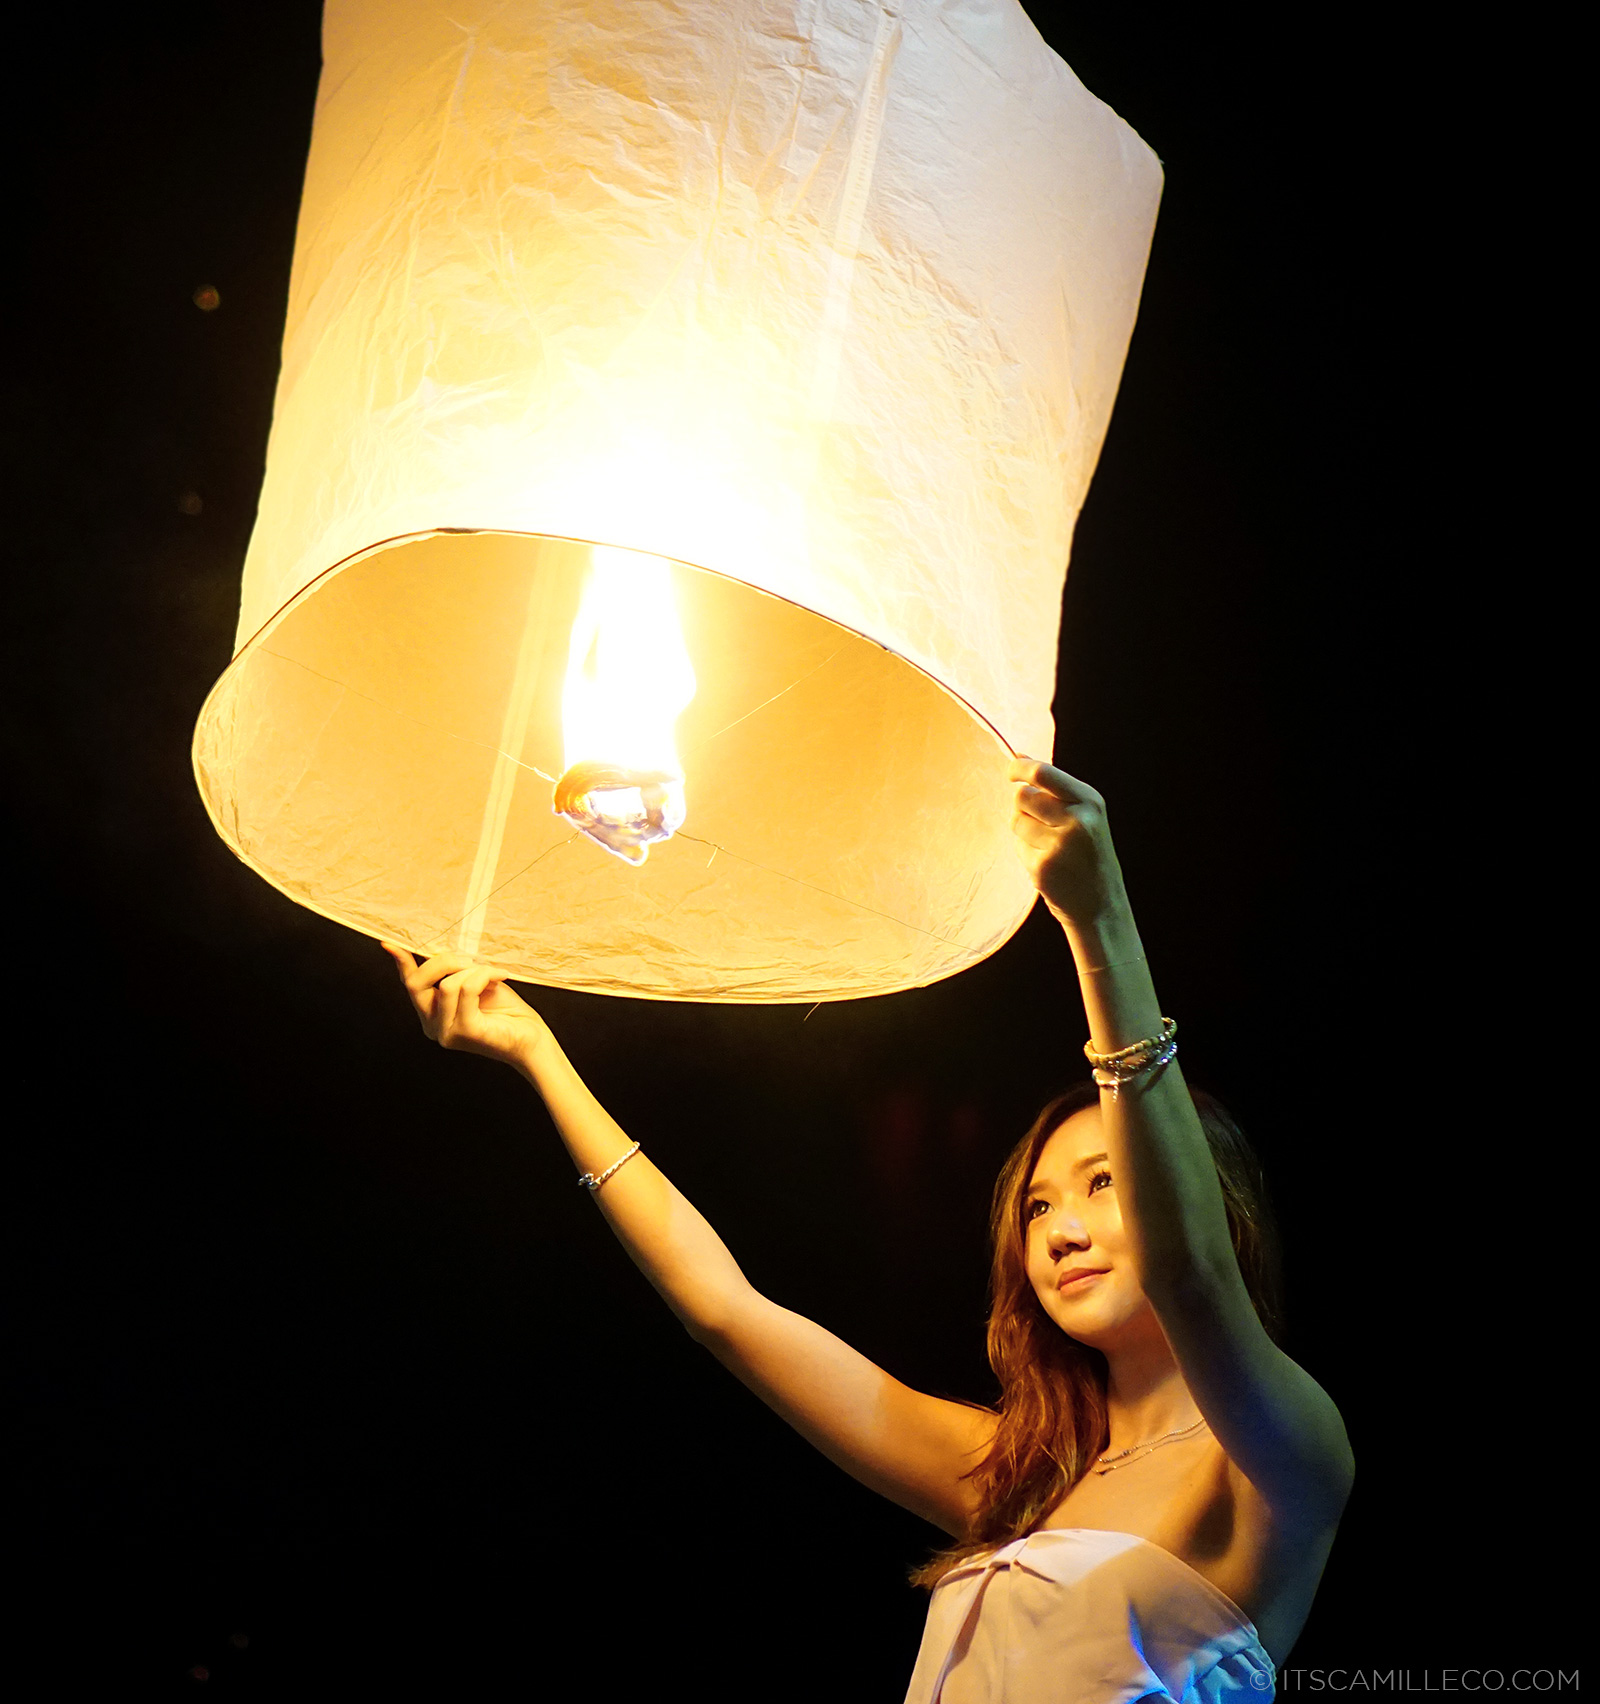 Yi Pen Loy Kathrong Lantern Festival in Chiang Mai | www.itscamilleco.com